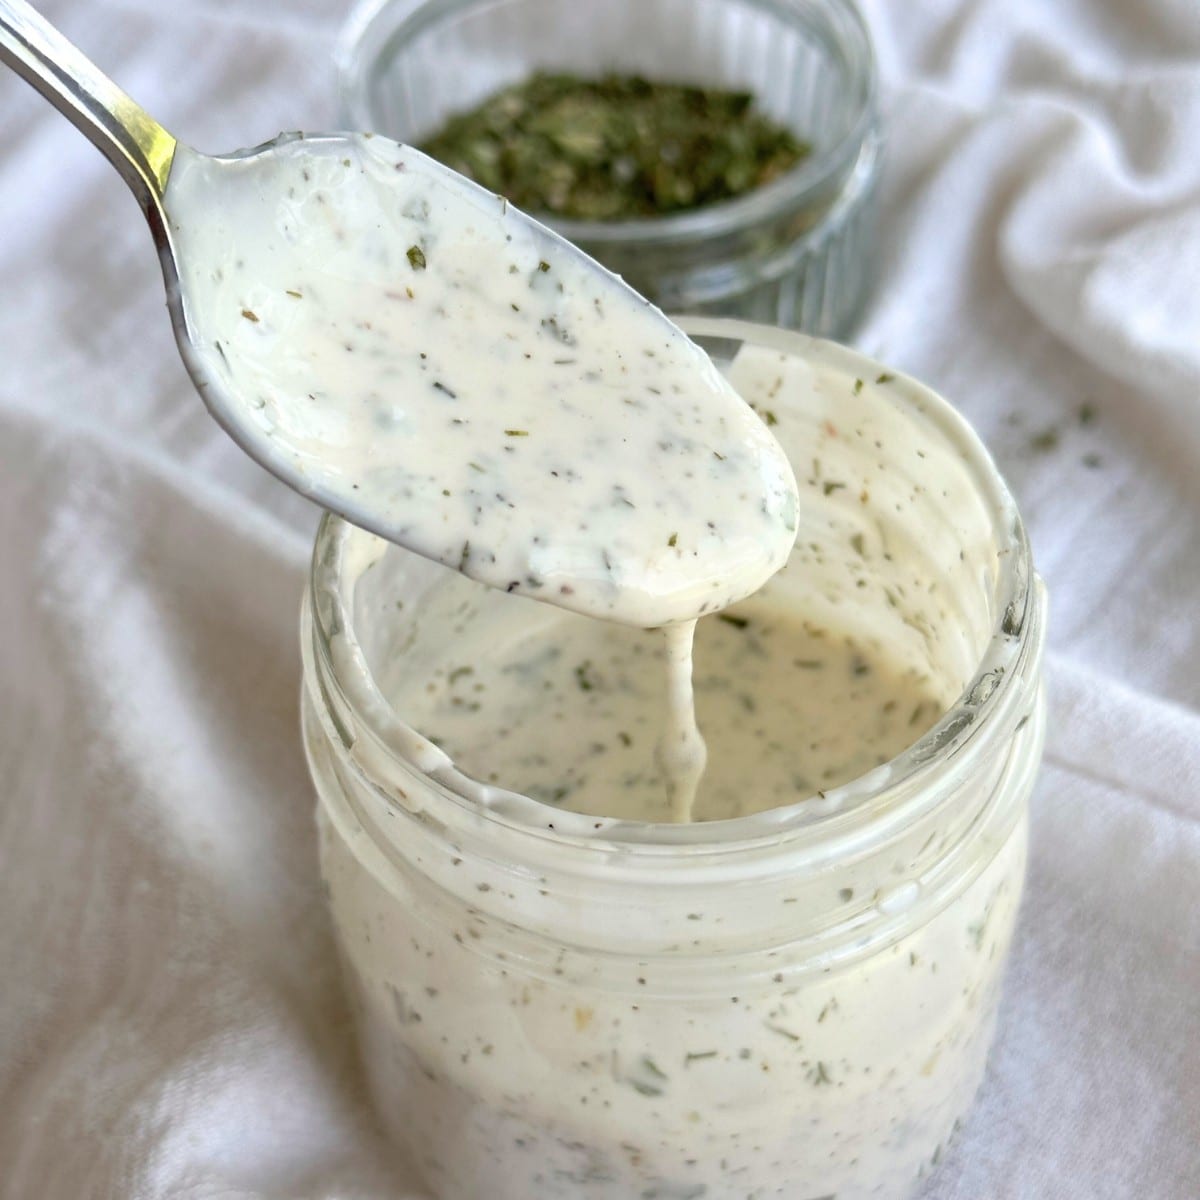 Spoonful of vegan ranch dressing dripping into a glass mason jar full of vegan ranch dressing. Bowl of dairy-free ranch seasoning is in the background on top of a white cloth.